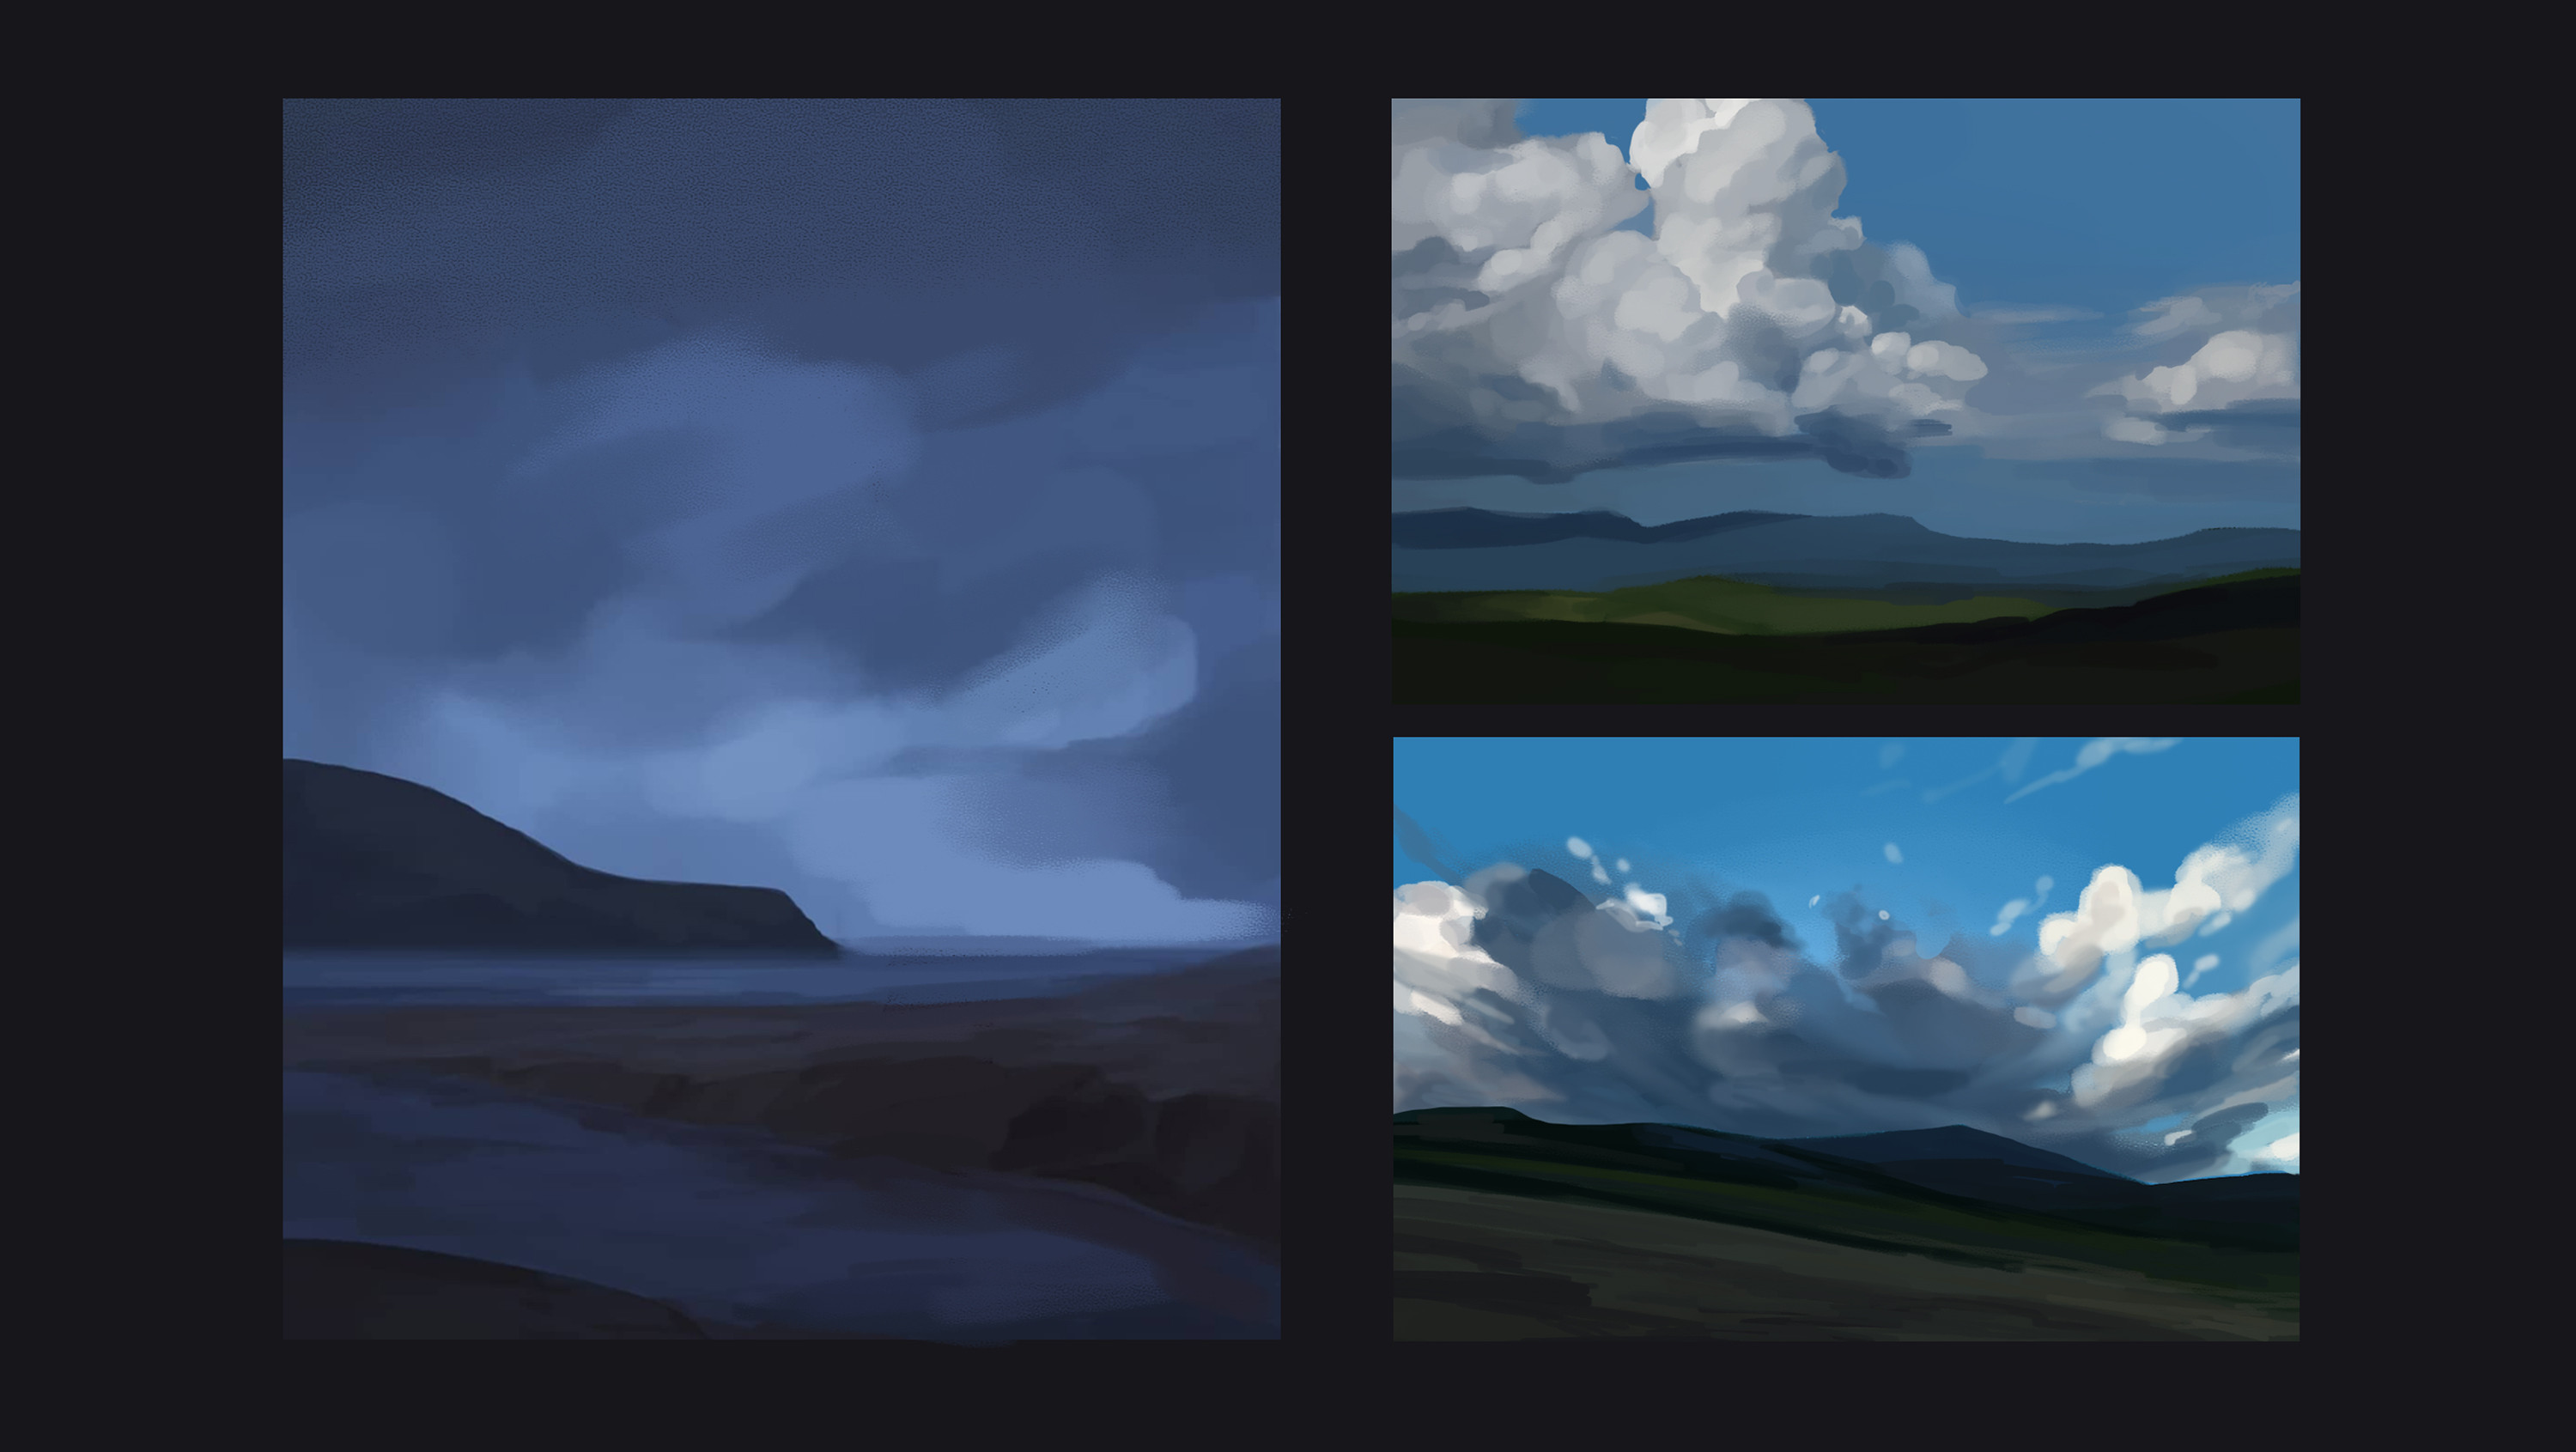 Early studies for the background